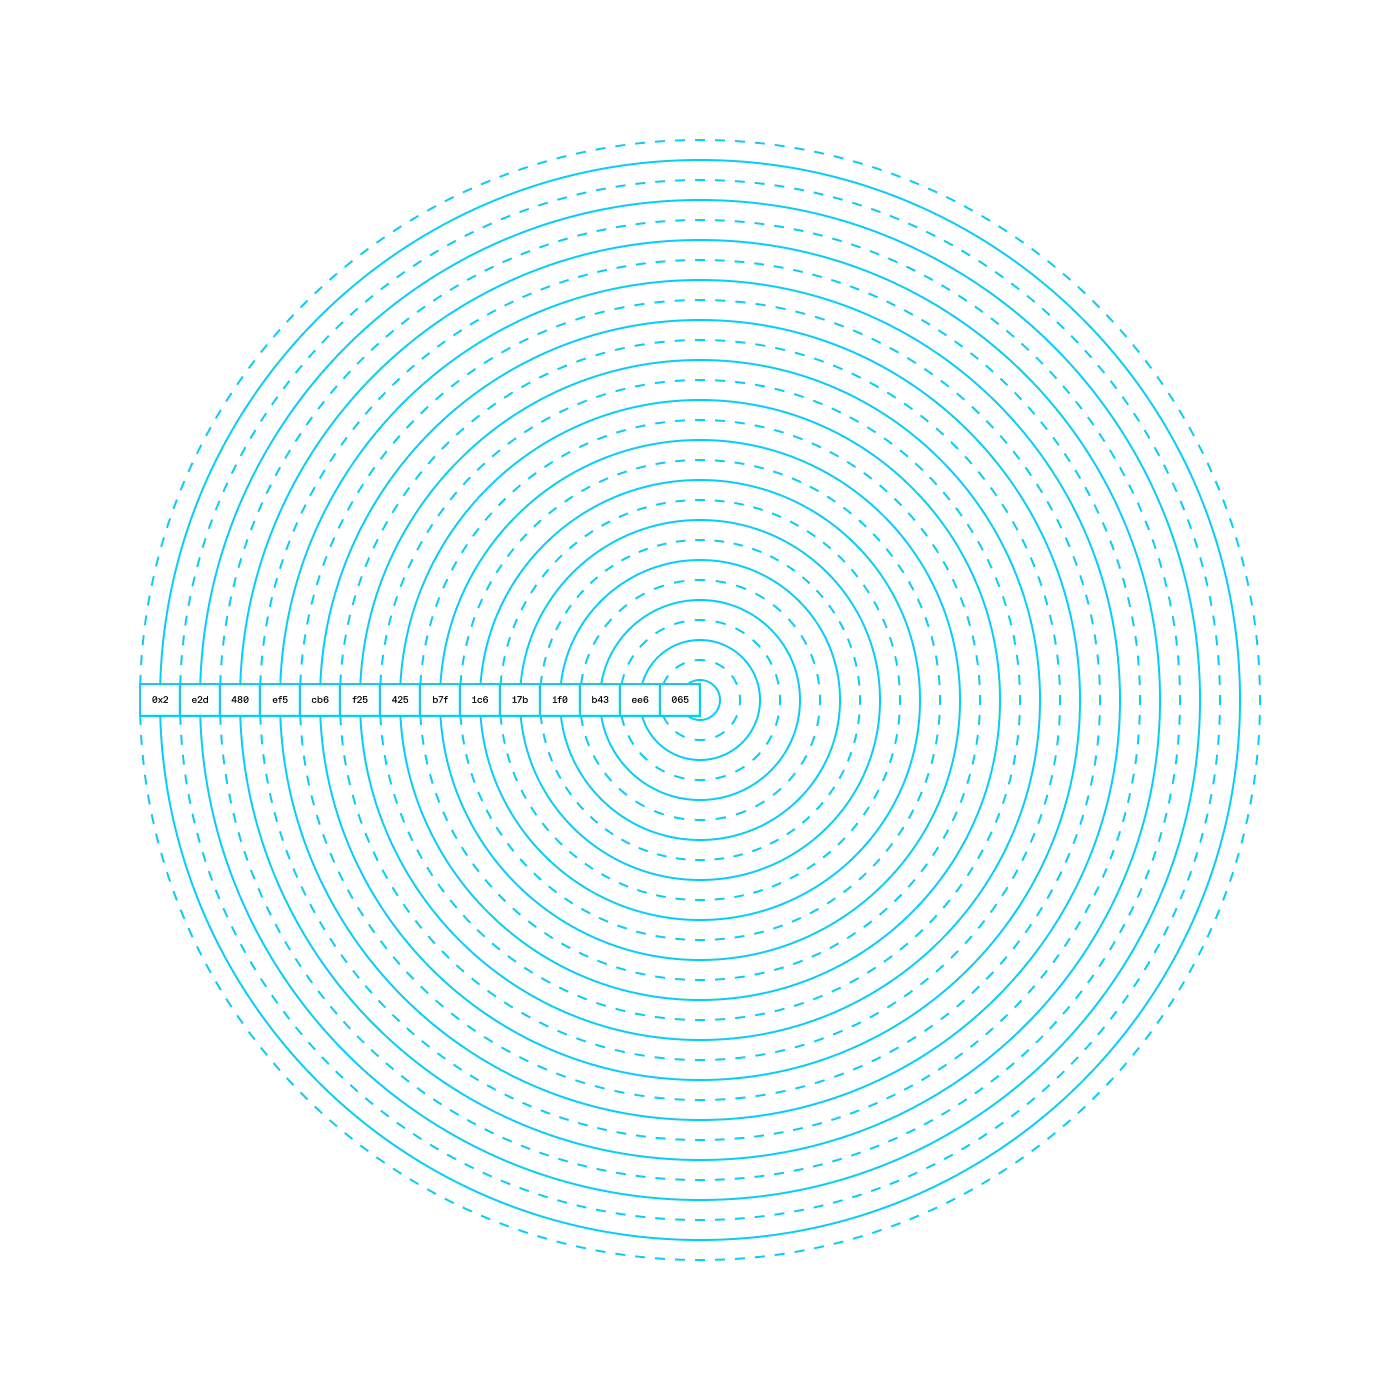 The inner structure of Sum is composed from 14 concentric rings